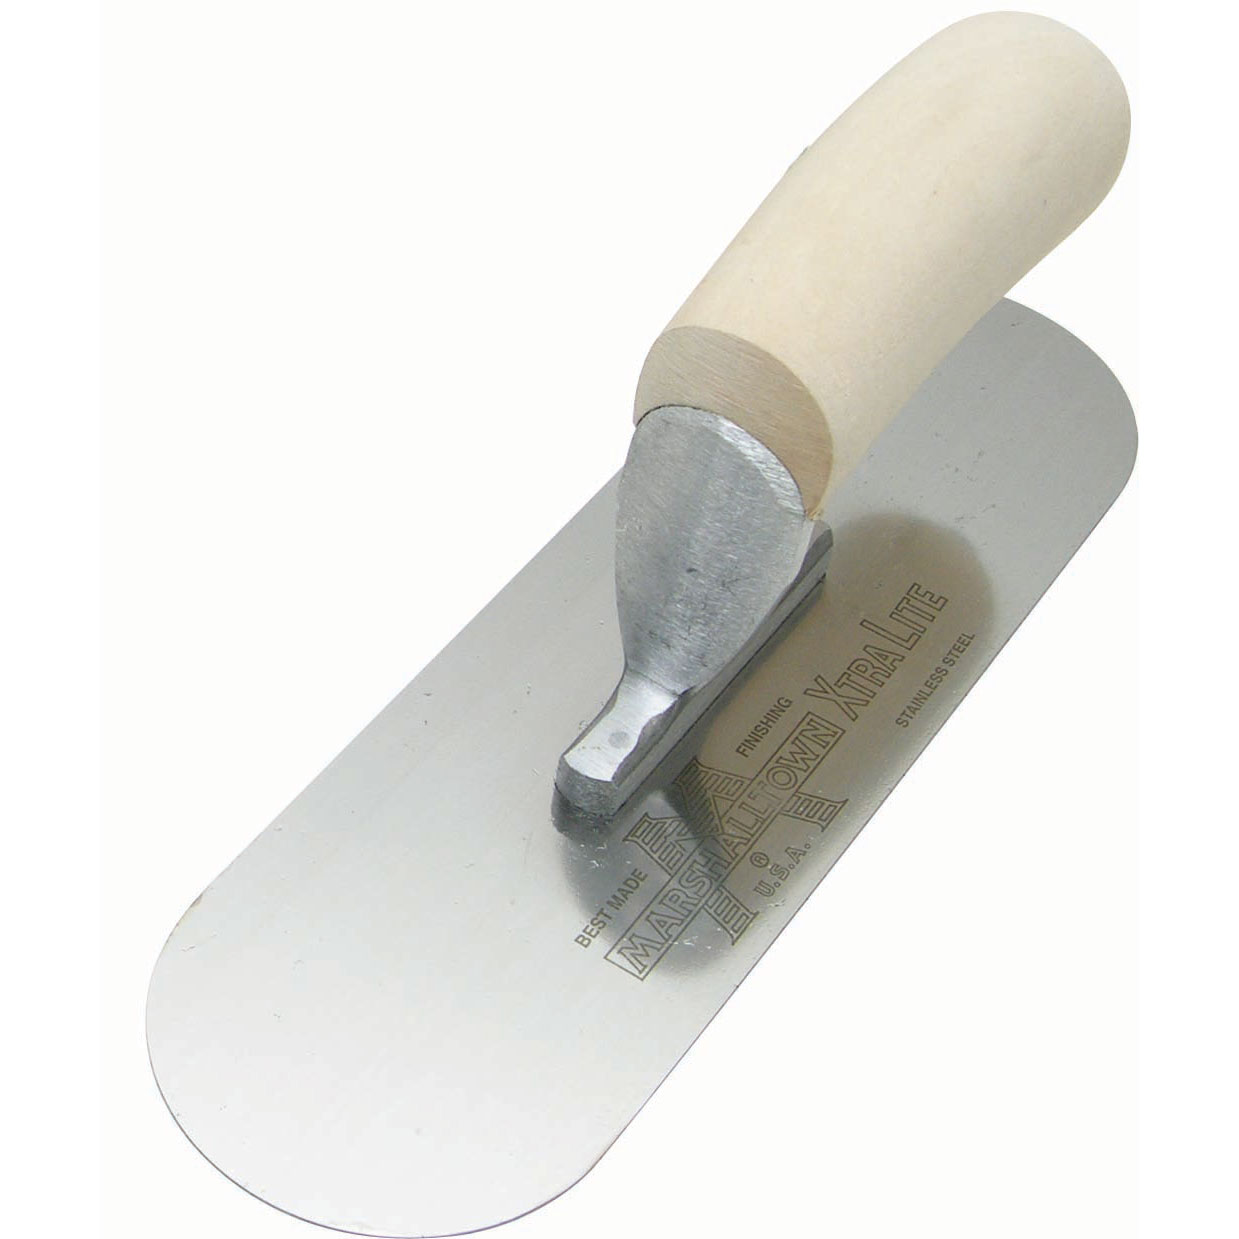 Marshalltown SP10SSR3 10in x 3in Pool Trowel with Exposed Rivet Trowels and Wood Handle SP10SSR3